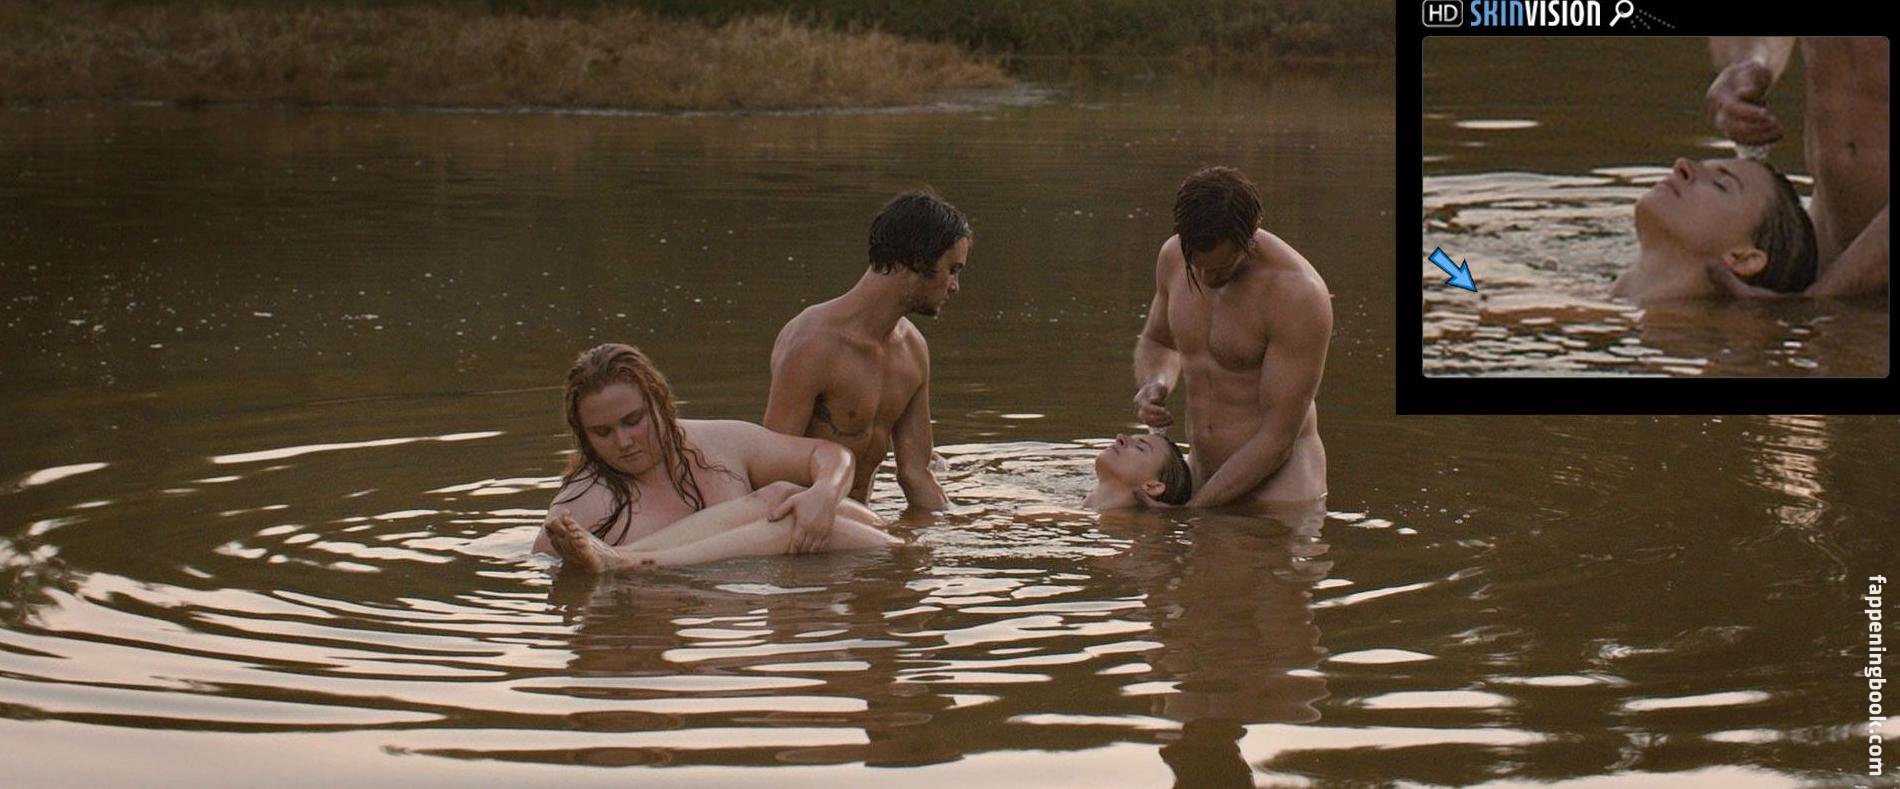 Brit Marling Nude, The Fappening - Photo #87382 - FappeningB. 